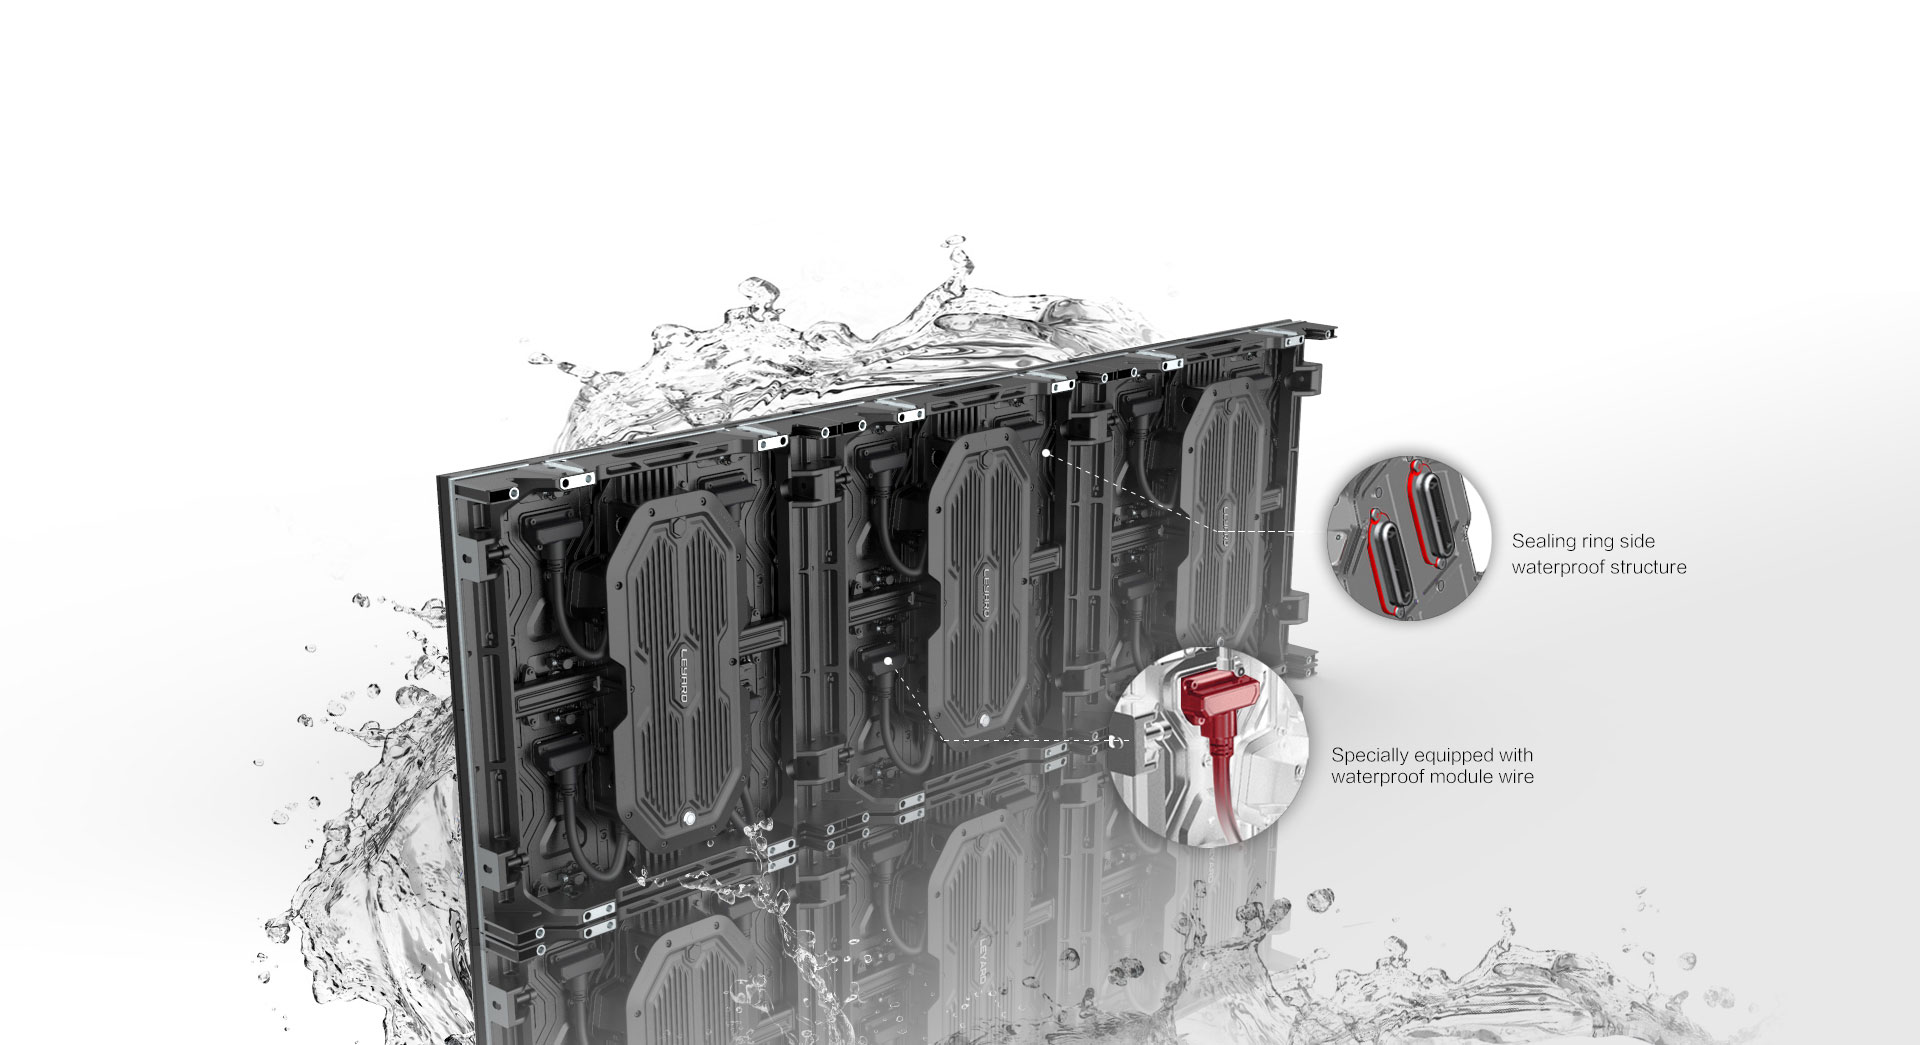 Ultra-high protection | IP66 waterproof structure design